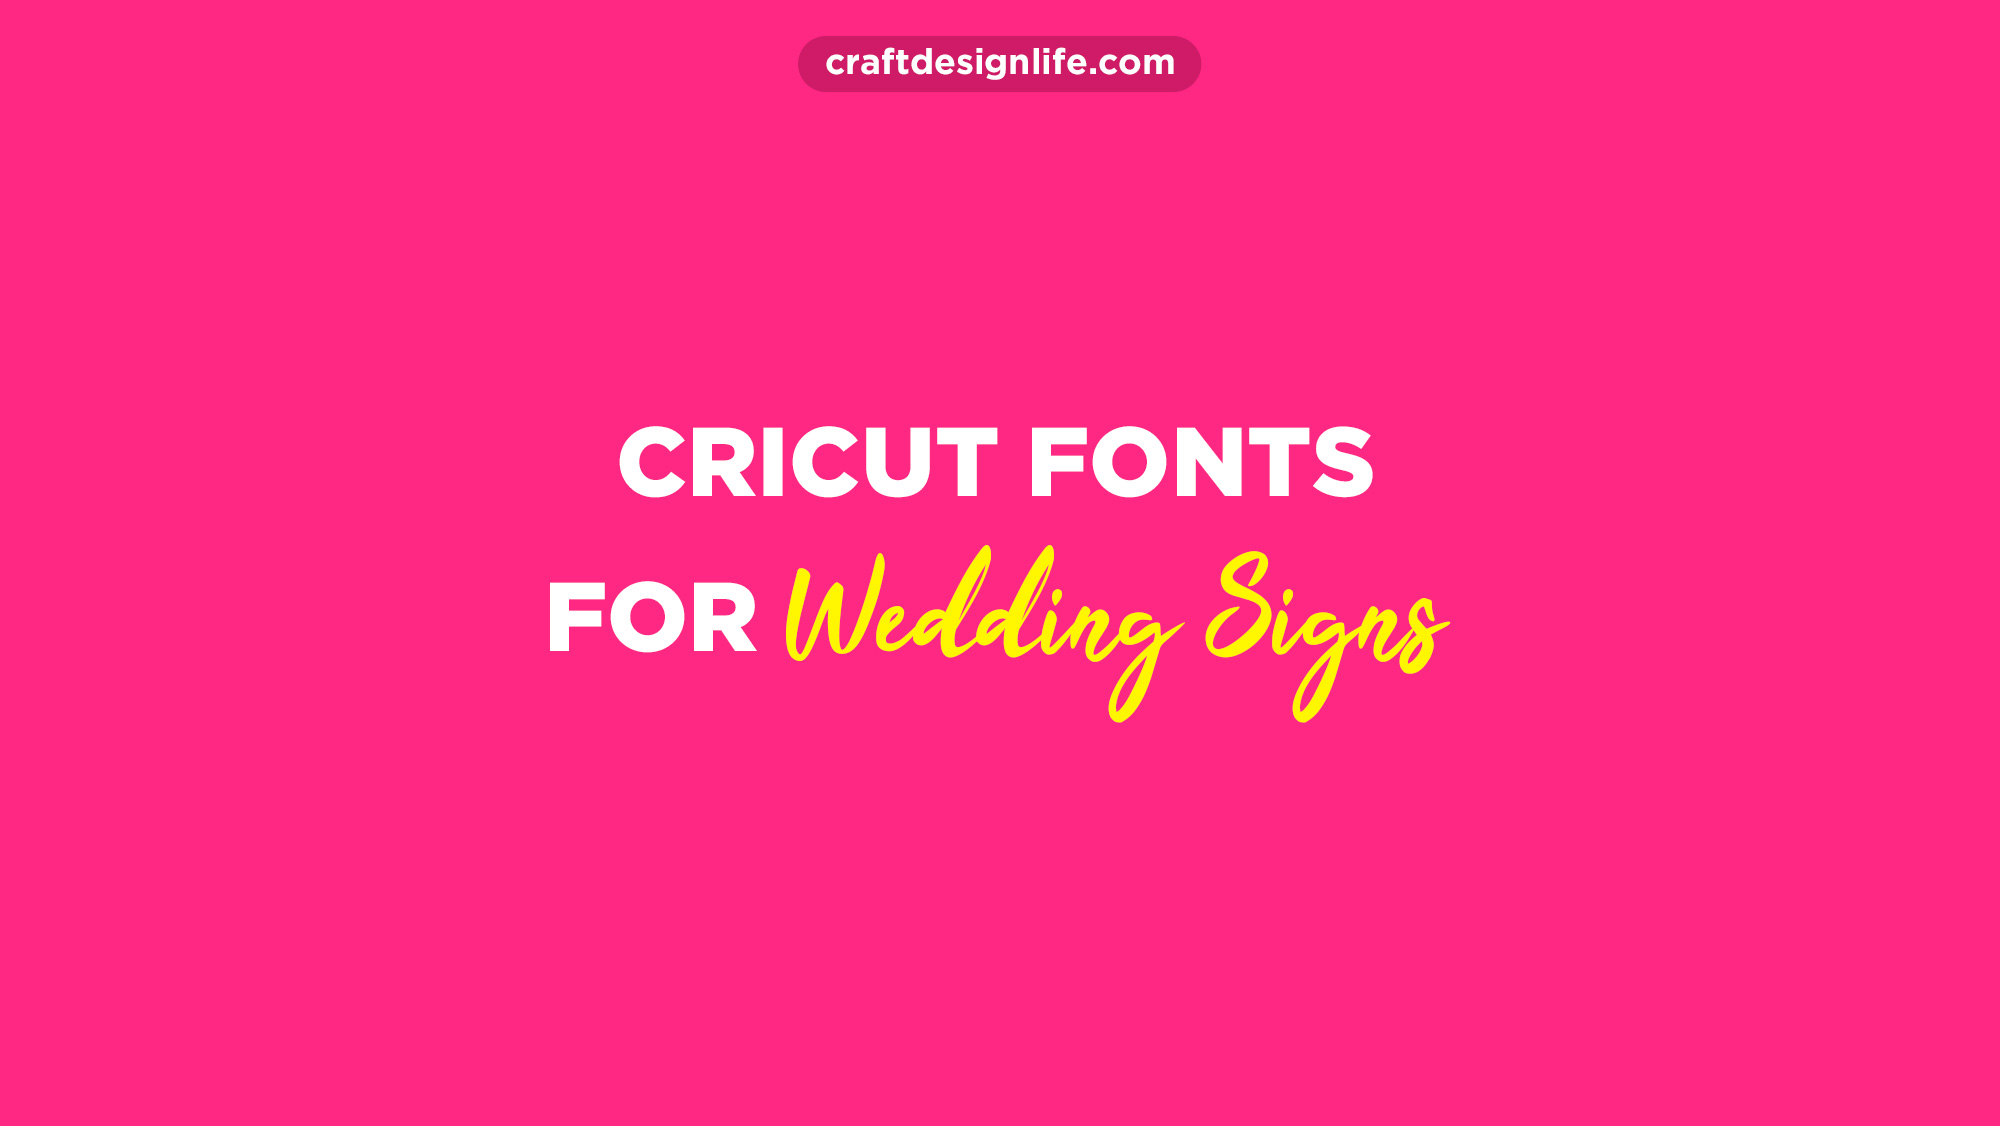 Best Cricut Fonts For Wedding Signs